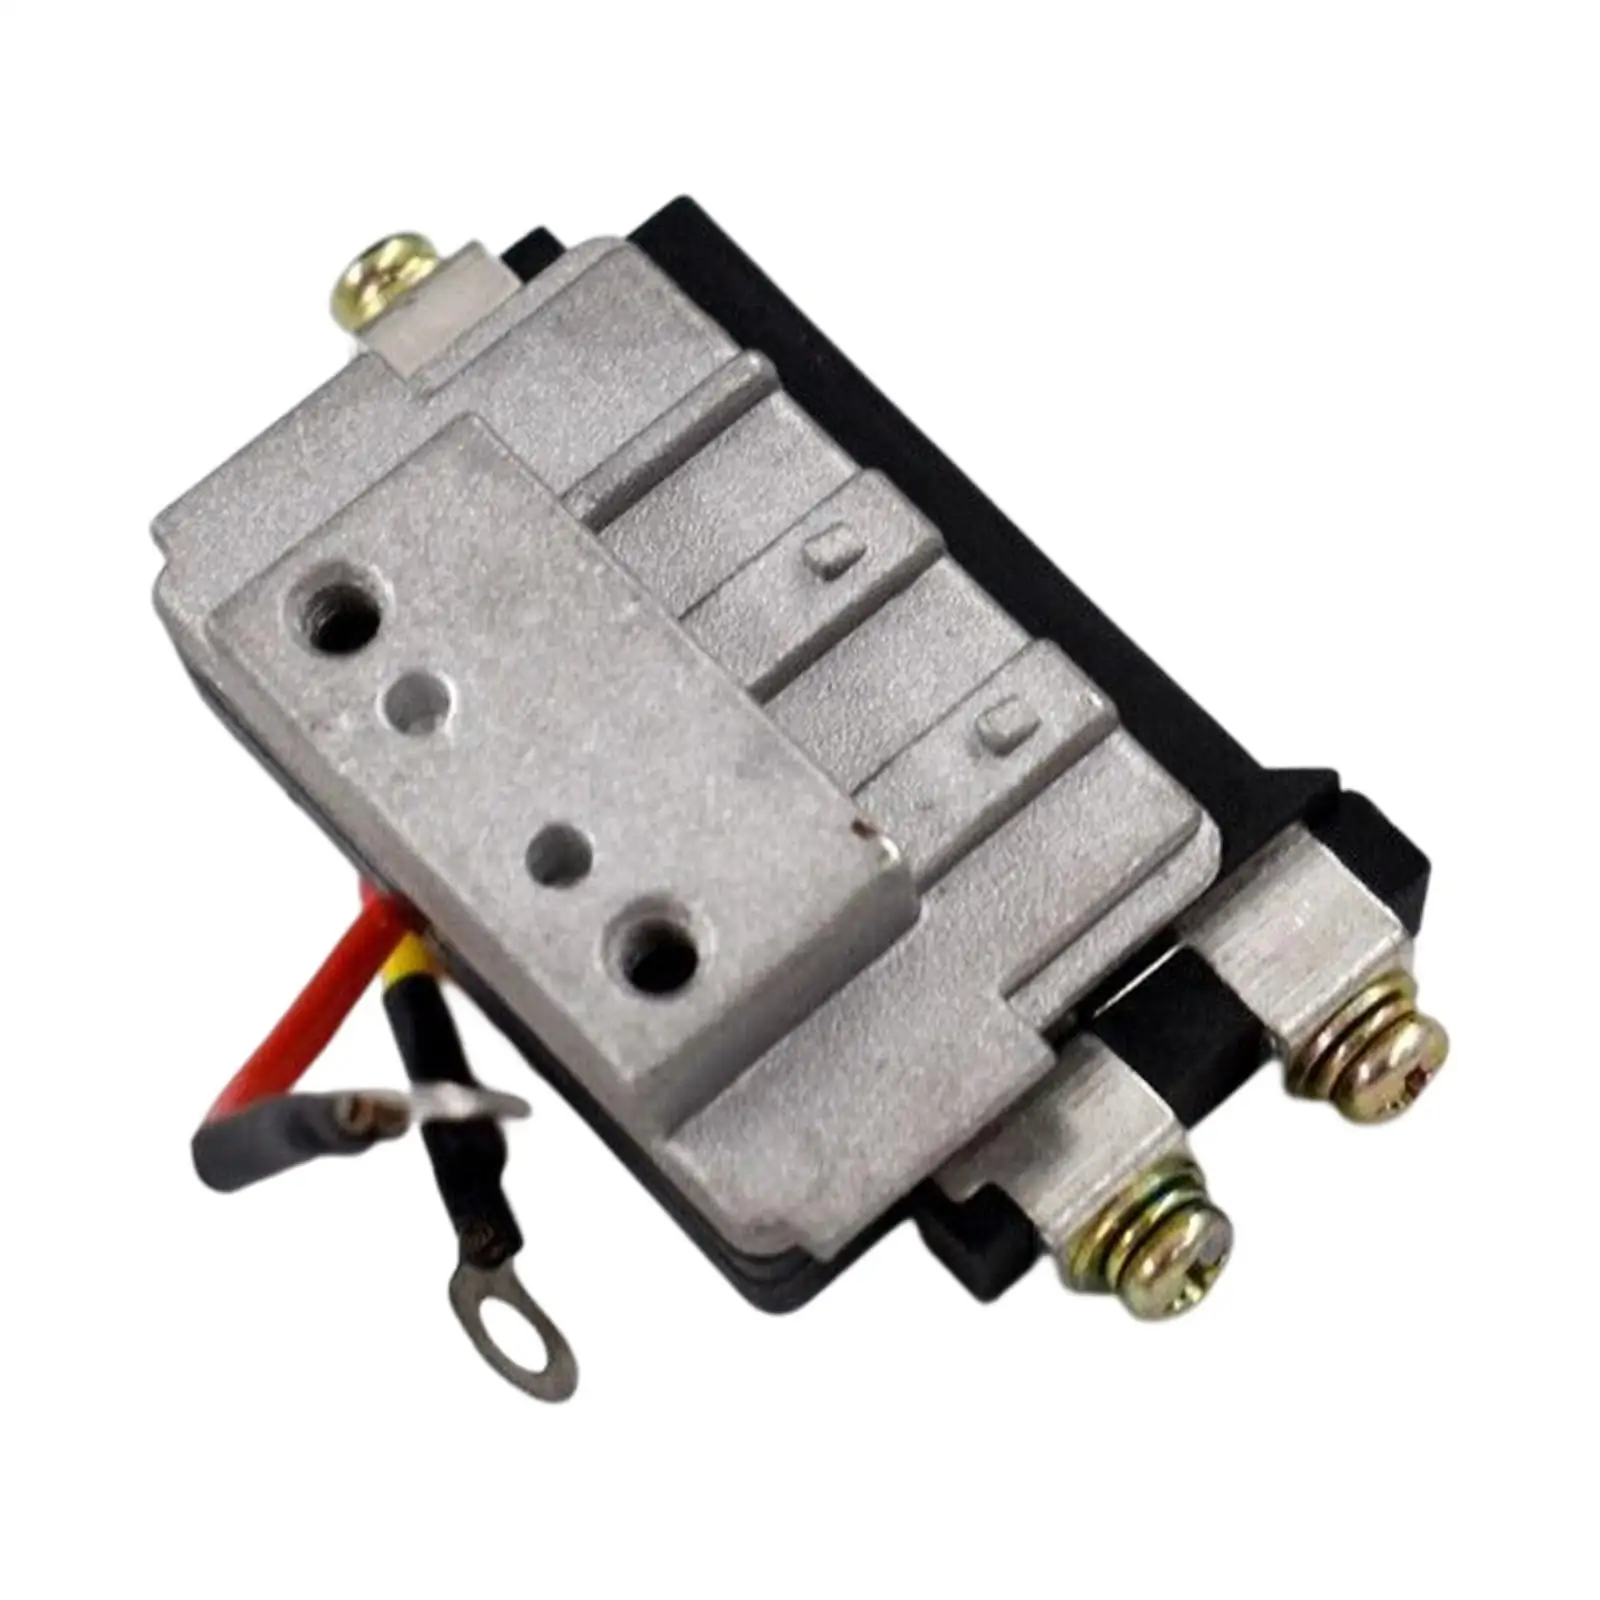 89620-12440 Ignition Control Module Replacement Accessories Auto Motor Easy to